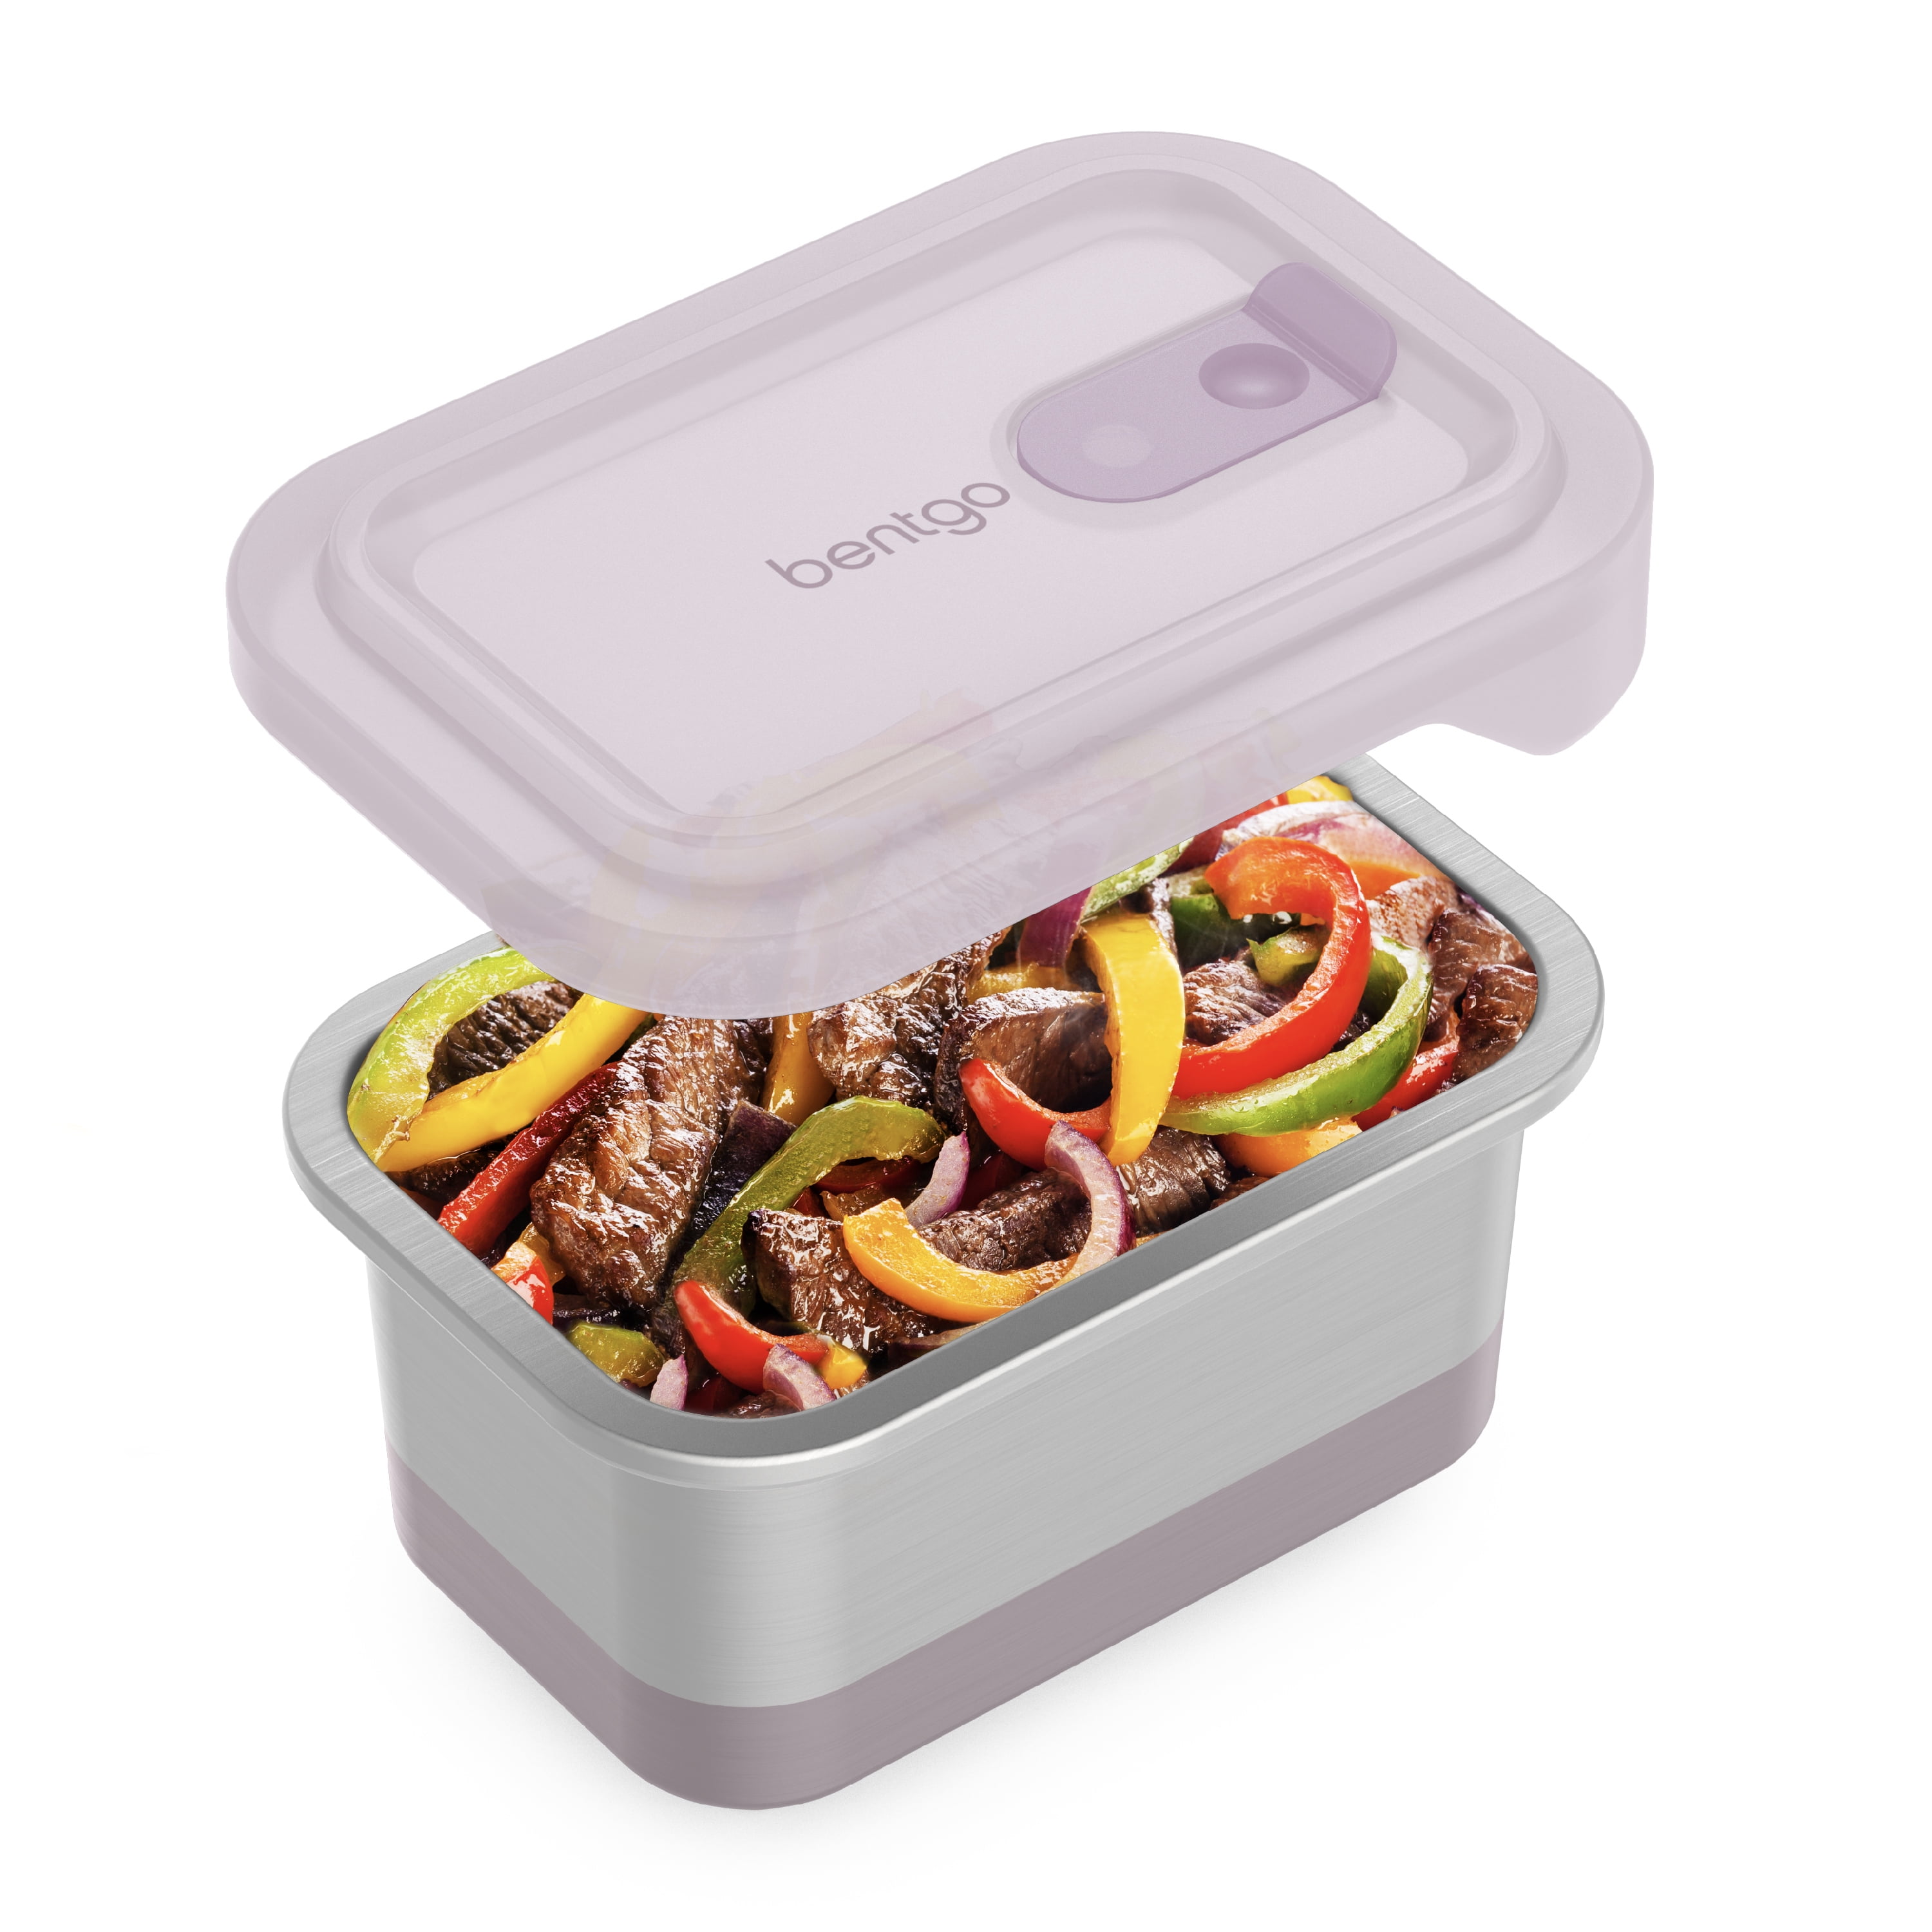  BEFOY Mini Stainless Steel Food Storage Containers Set